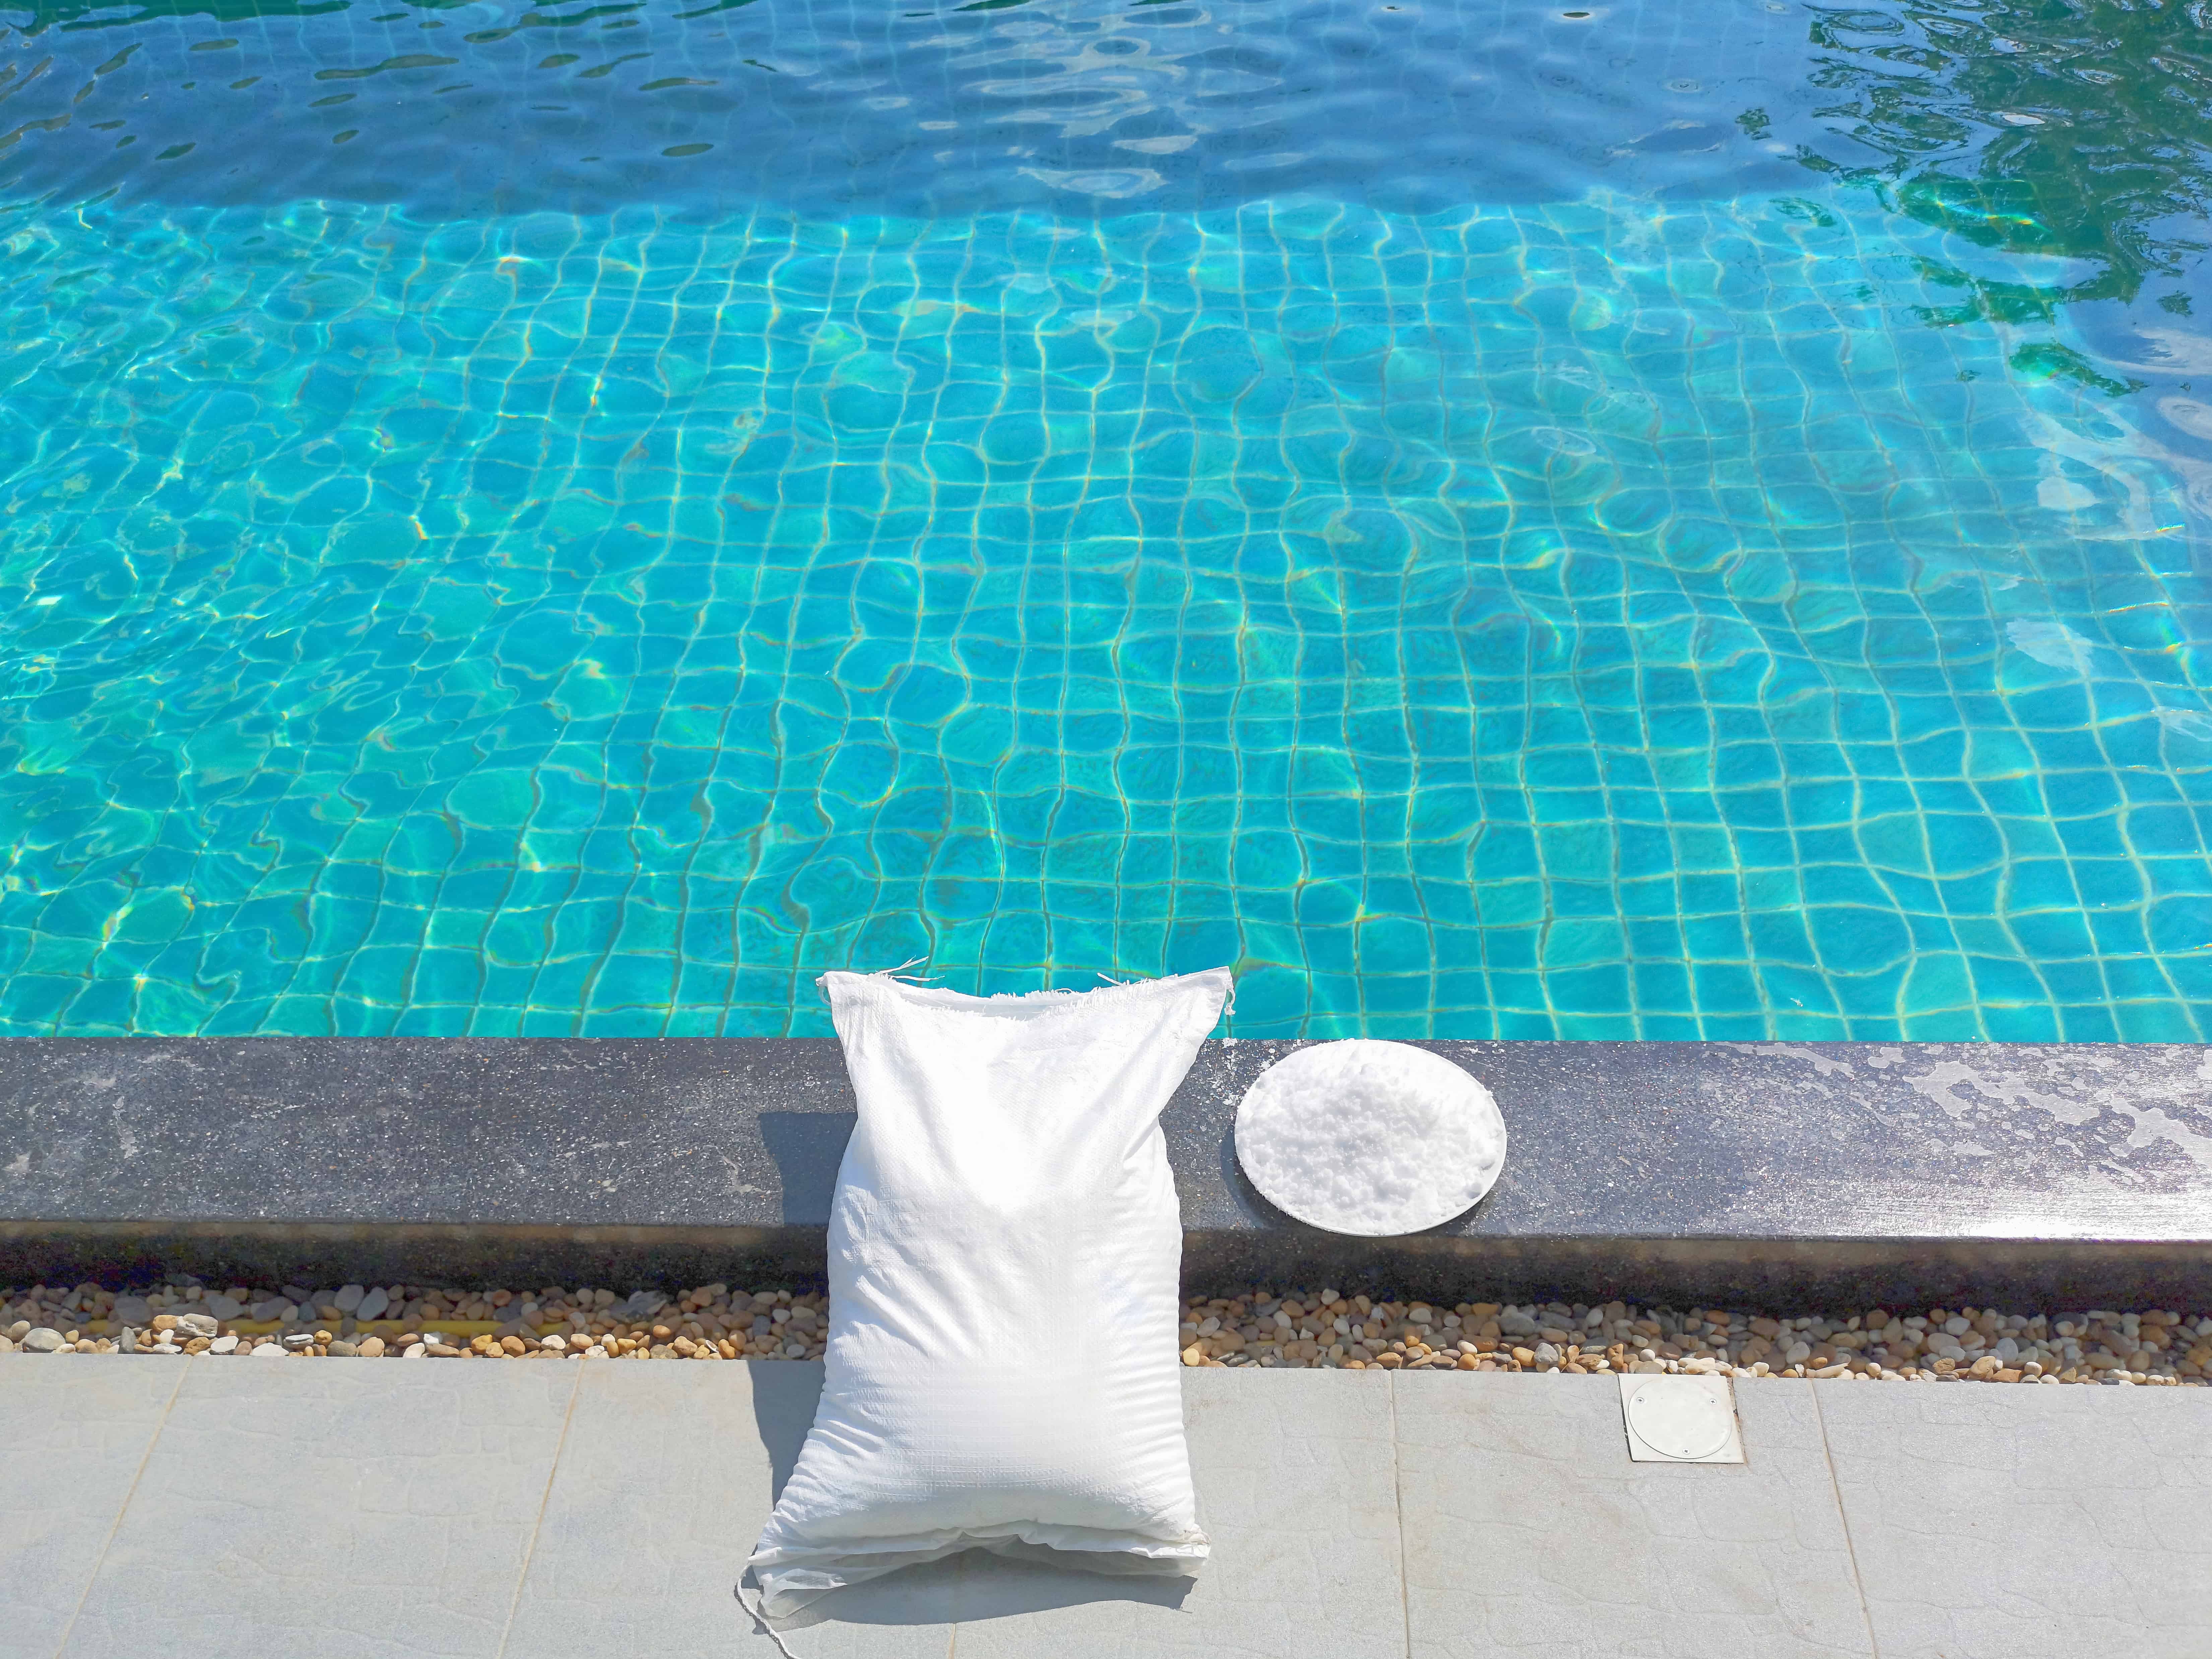 Salt is typically sold in varying bag sizes and can be dumped directly into the pool with the pump running.